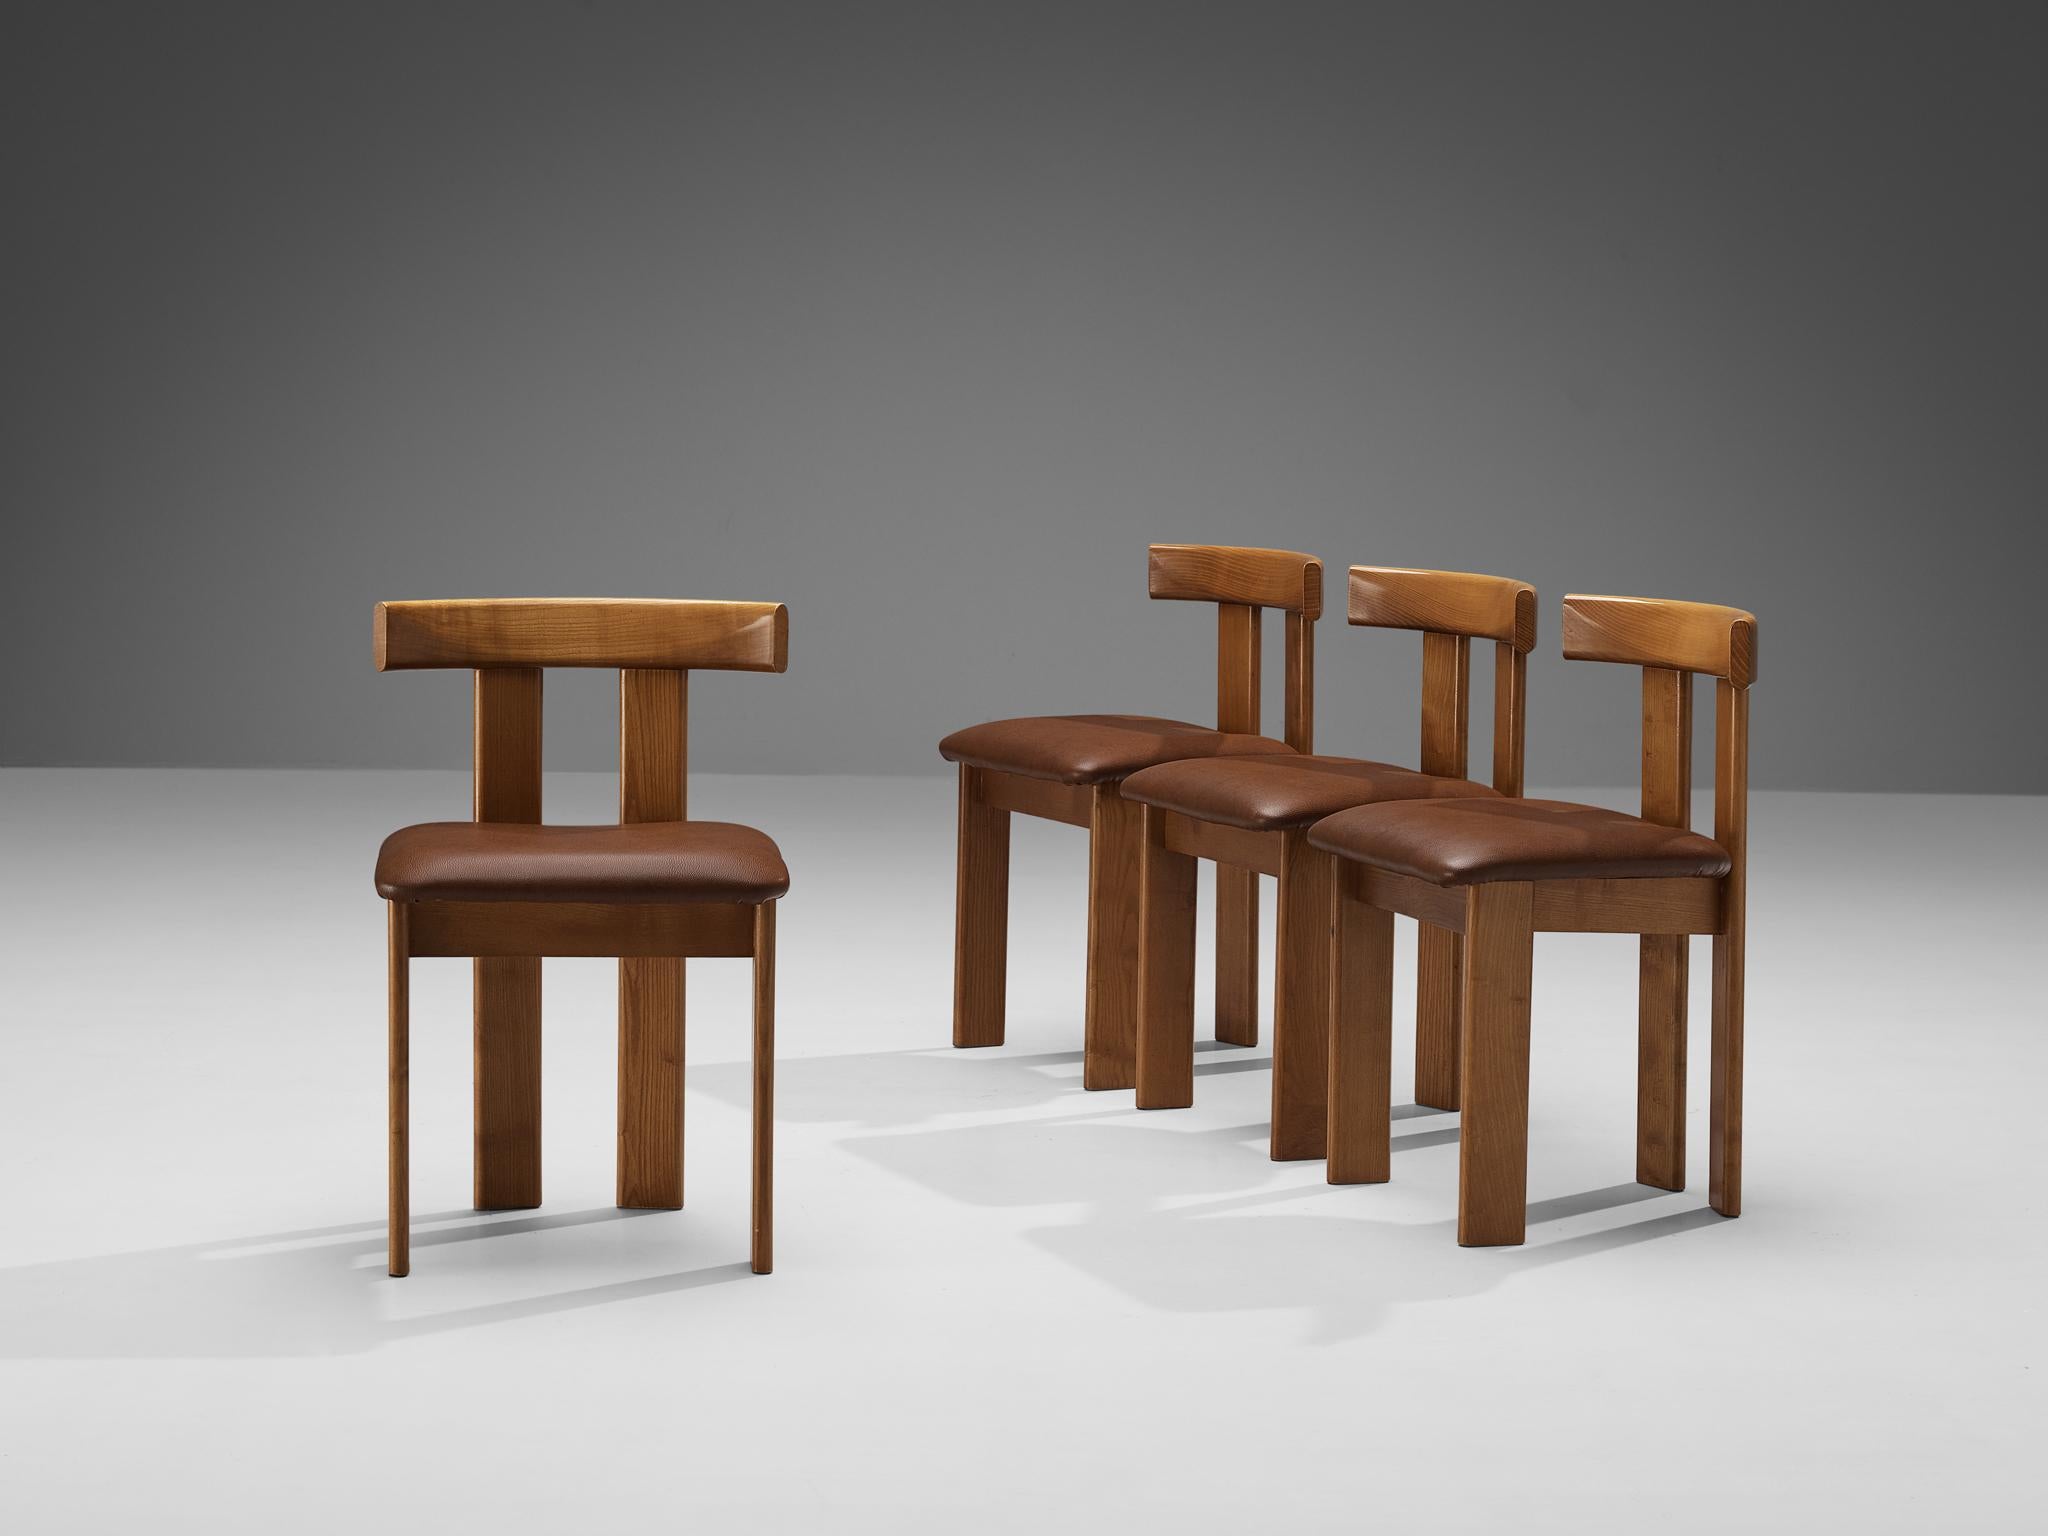 Luigi Vaghi for Former, set of four dining chairs, stained ash, faux leather, Italy, 1960s. 

A characteristic 'T-chair' design; simplistic yet very strong in lines and proportions. Wonderful dynamic frame executed in ash, whereby the rear legs are